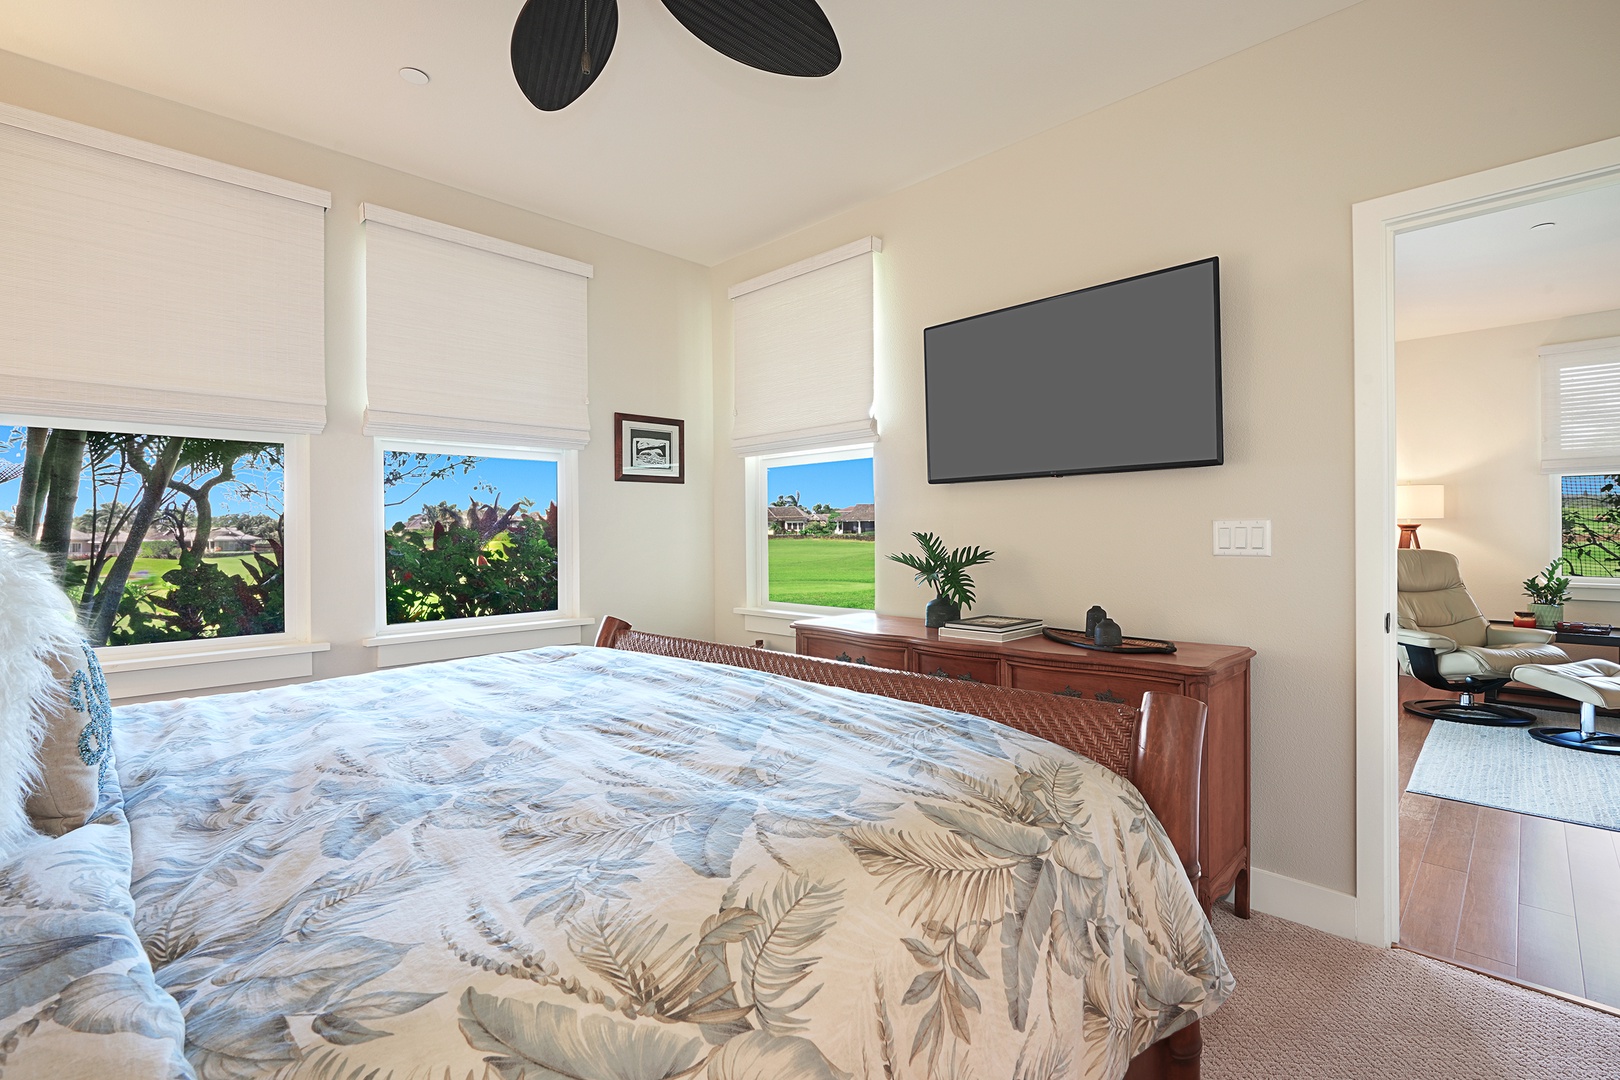 Koloa Vacation Rentals, Pili Mai 7J - Spacious and sunlit bedroom with panoramic views, perfect for a serene retreat.